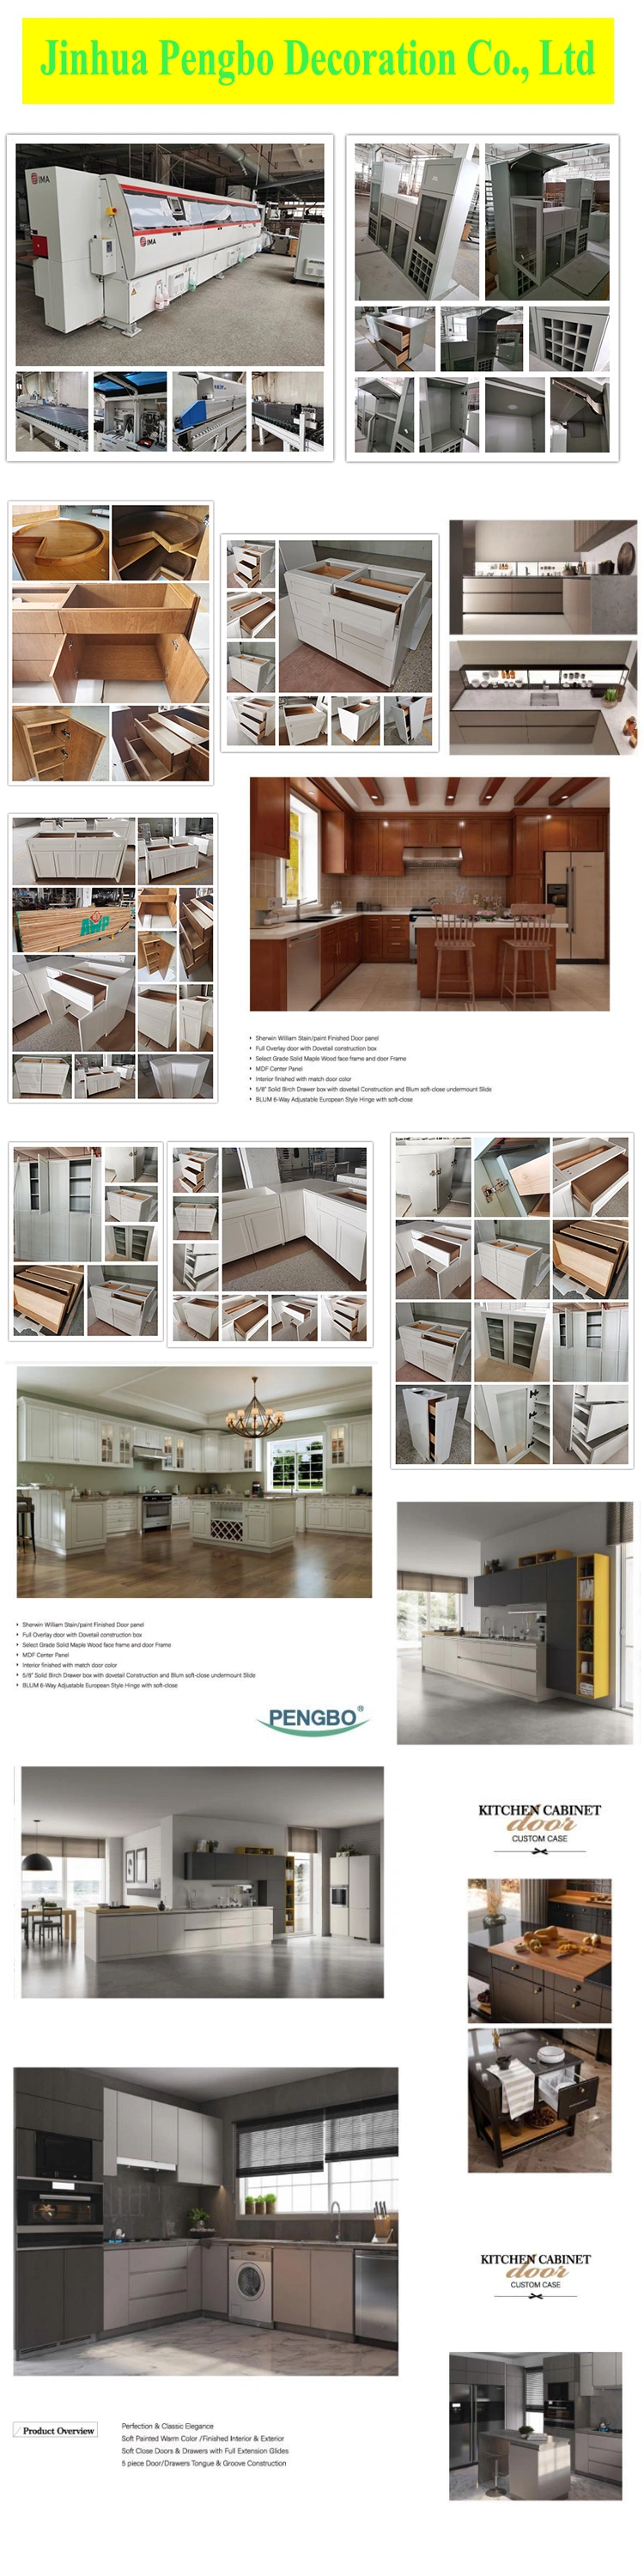 Fiberglass Imported Acrylic Modern Commercial Melamine Kitchen Cabinet From China